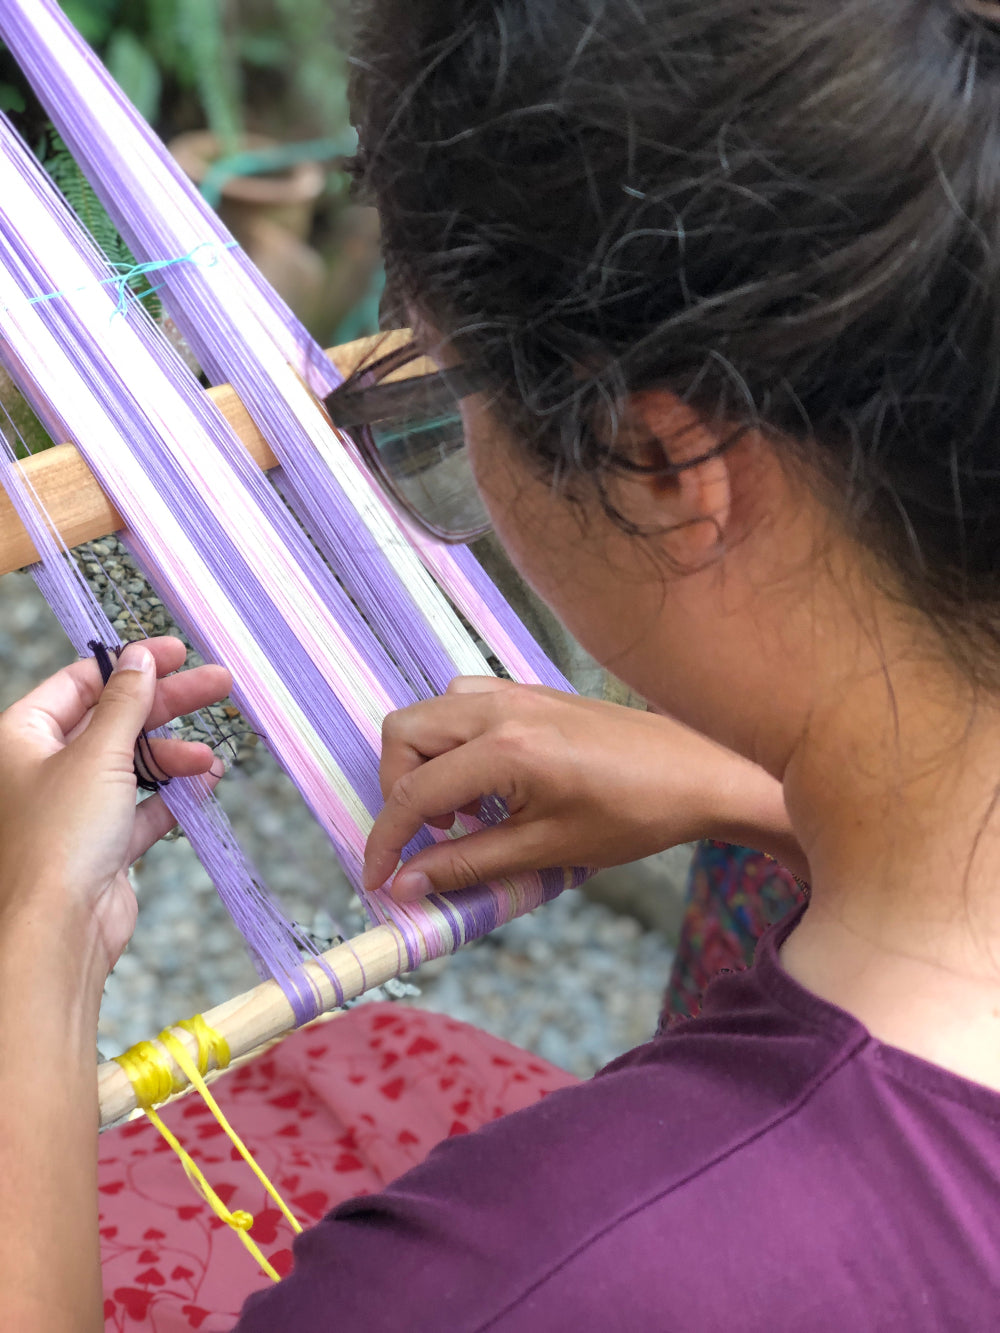 Private Class: Warping your own loom (incl materials) / Contact us to schedule